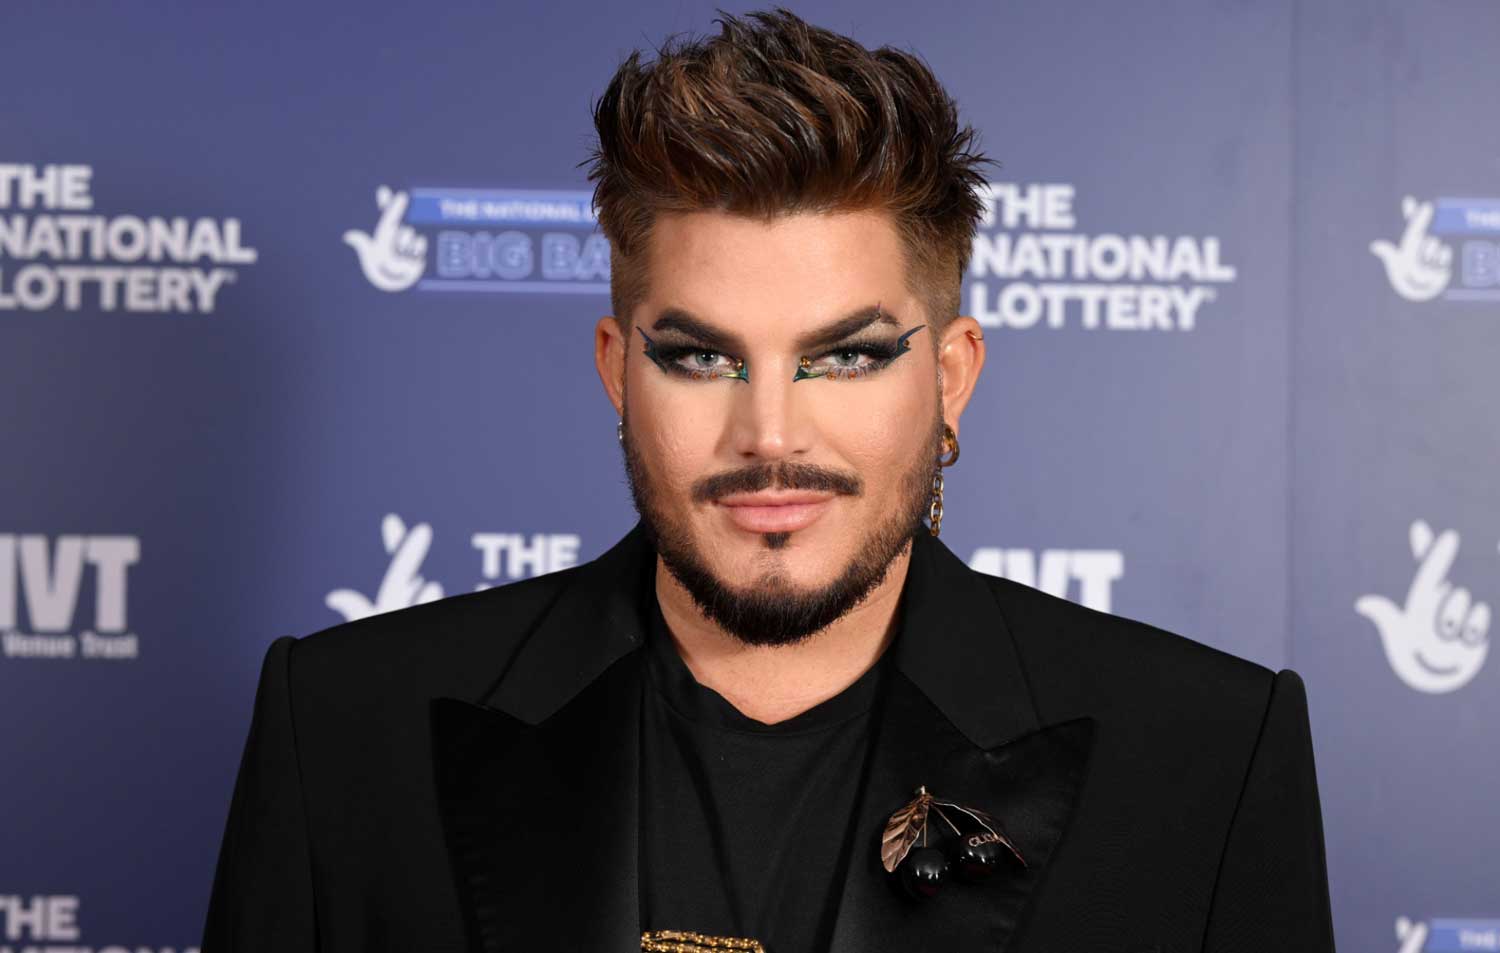 Adam Lambert's Net Worth in 2023 A Look at His Diverse Sources of